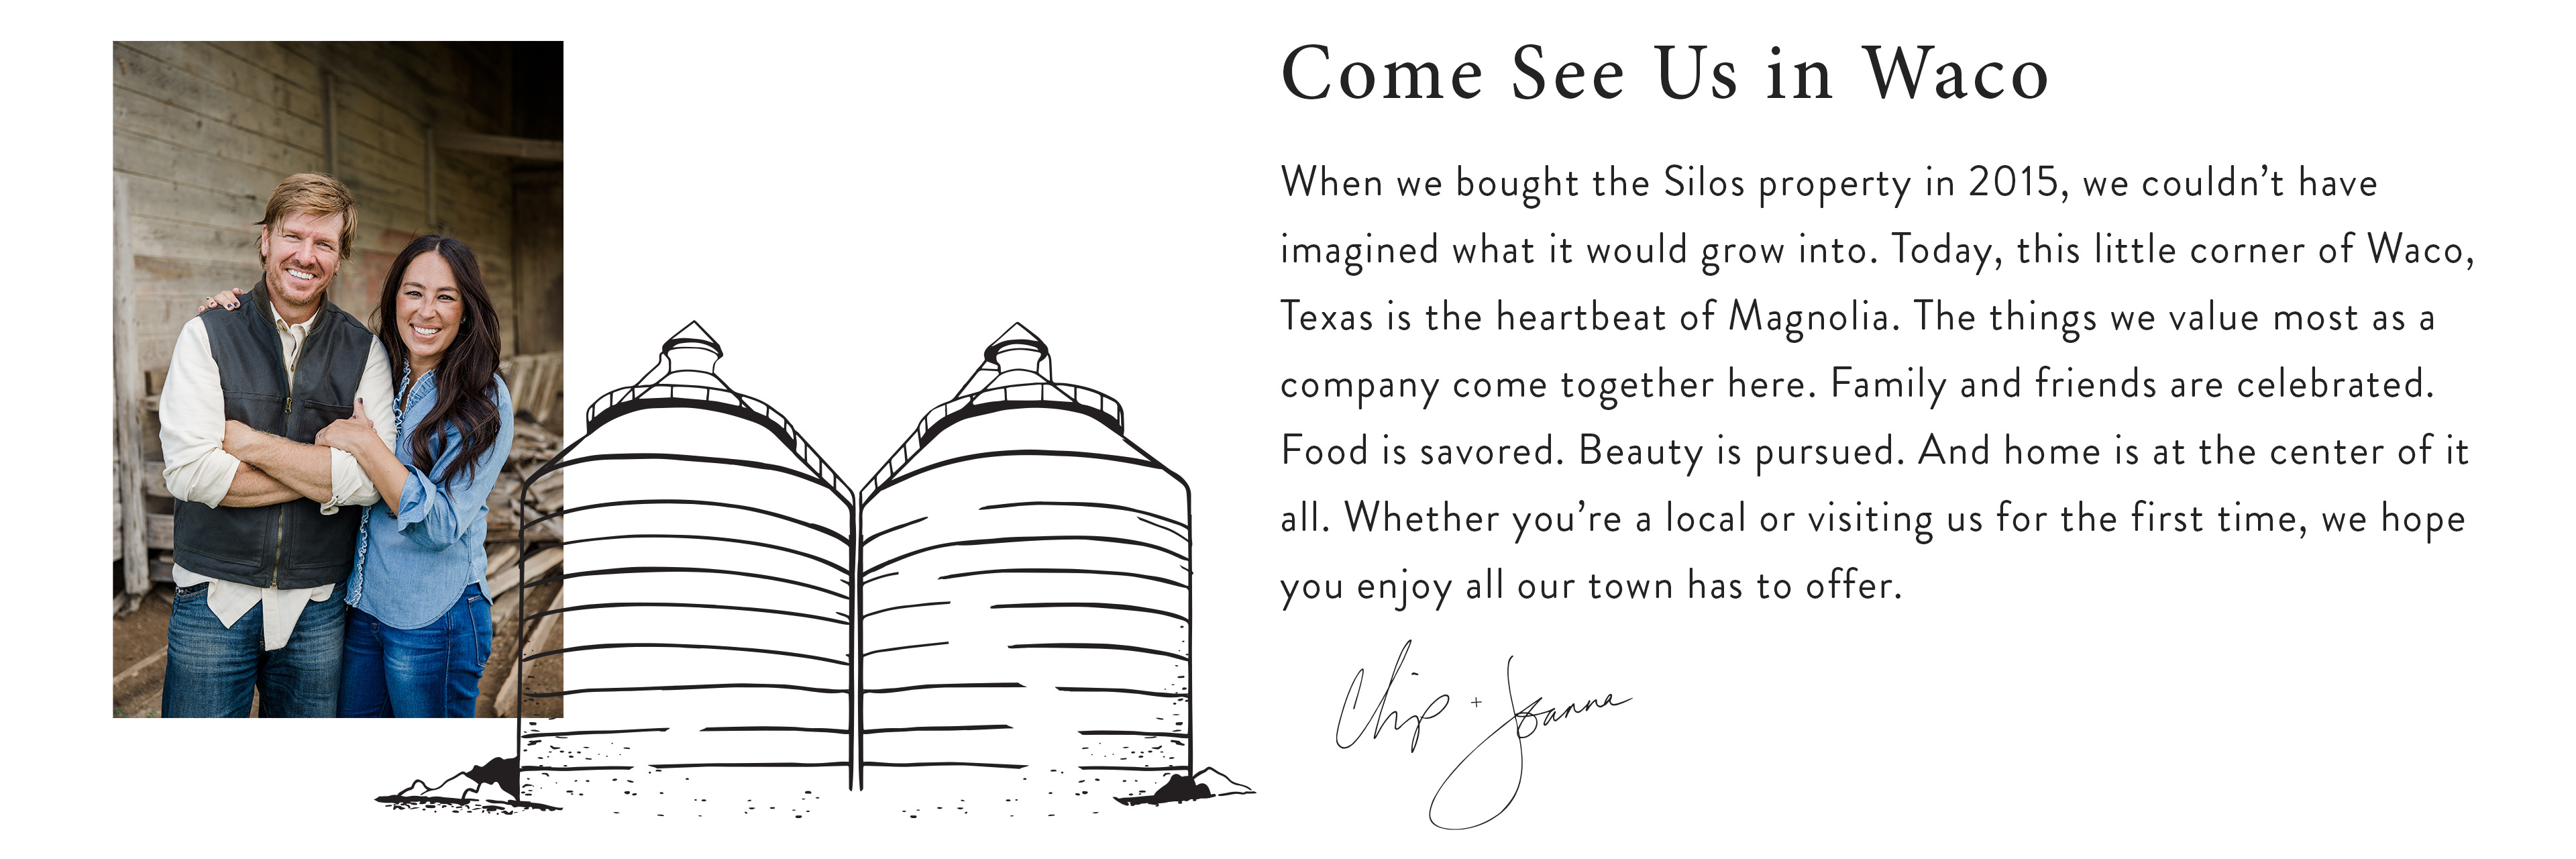 When we bought the Silos property in 2015, we couldn't have imagined what it would grow into. Today, this little corner of Waco, Texas is the heartbeat of Magnolia. The things we value most as a company come together here. Family and friends are celebrated. Food is savored. Beauty is pursued. And home is at the center of it all. Whether you're a local or visiting us for the first time, we hope you enjoy all our town has to offer. signed Chip and Joanna. 